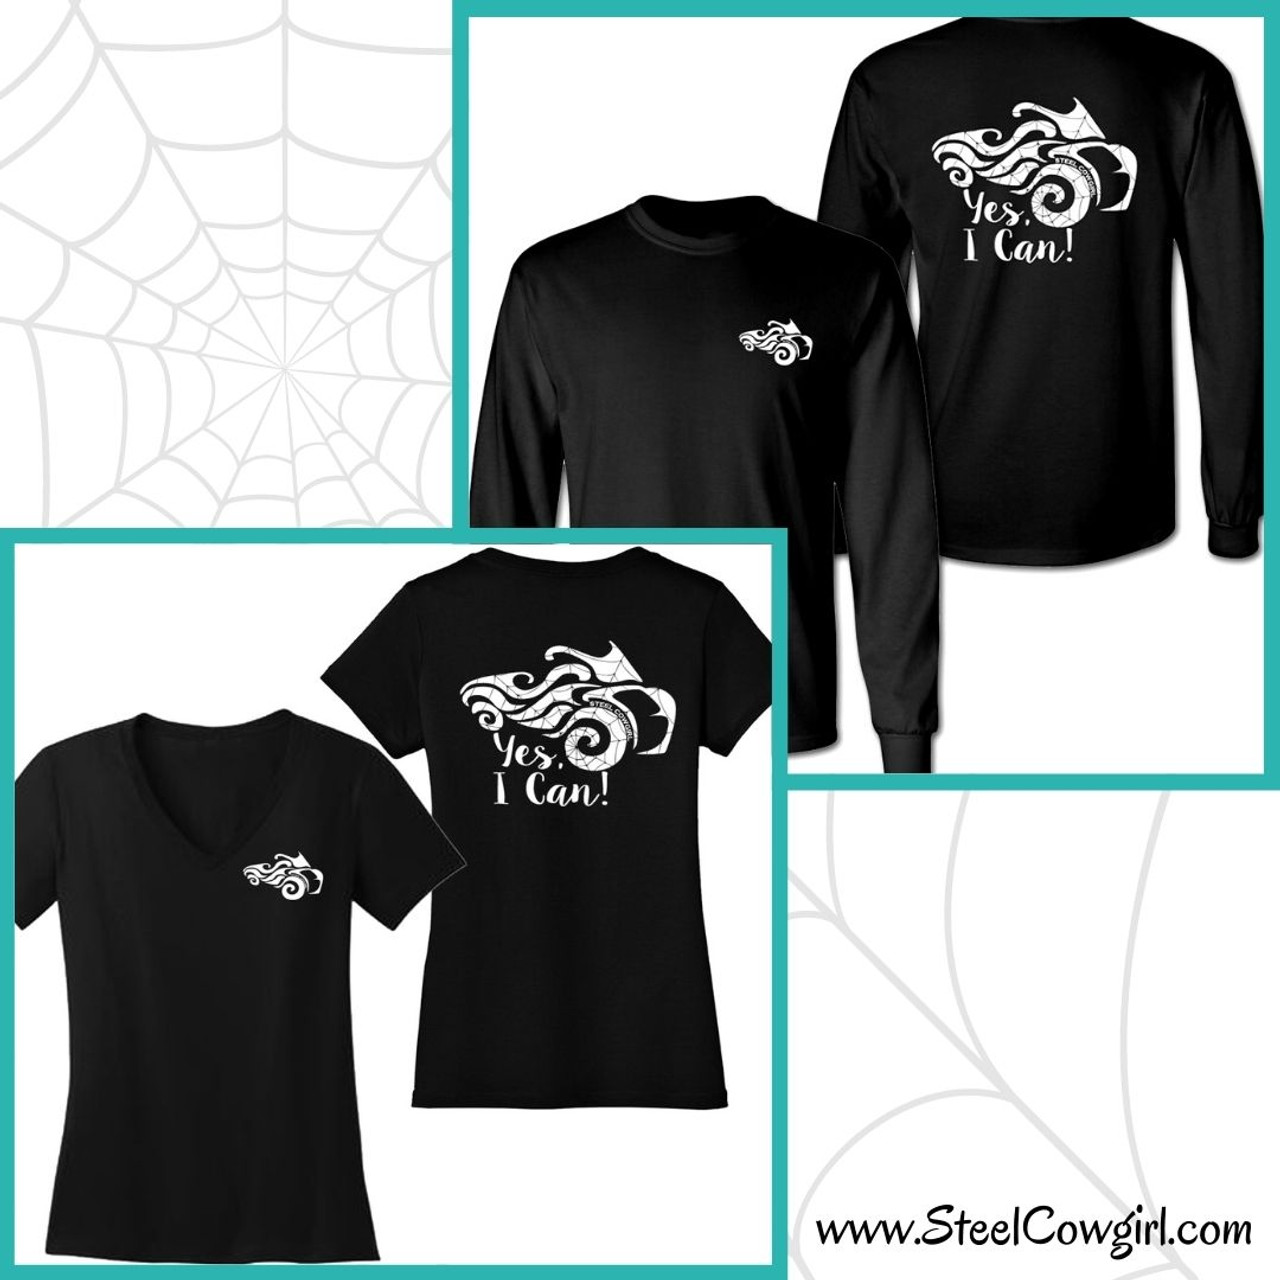 Yes I Can! Spyder Shirt - SIZE CHARTS In Description